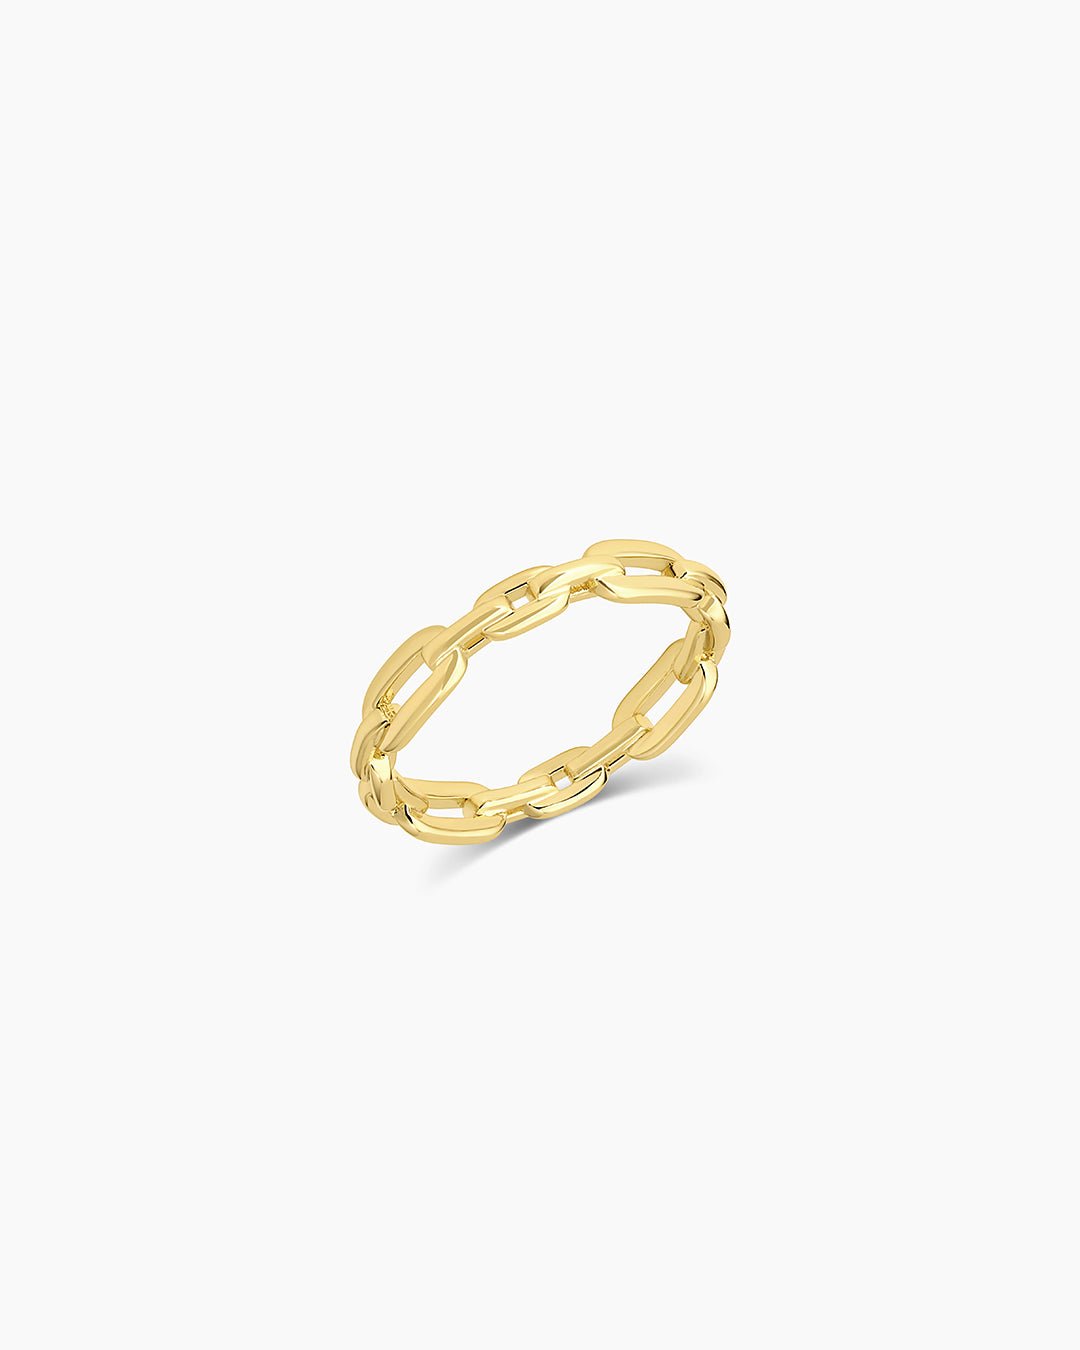 Parker Link Ring, Gold Plated link ring, chain link ring || option::Gold Plated